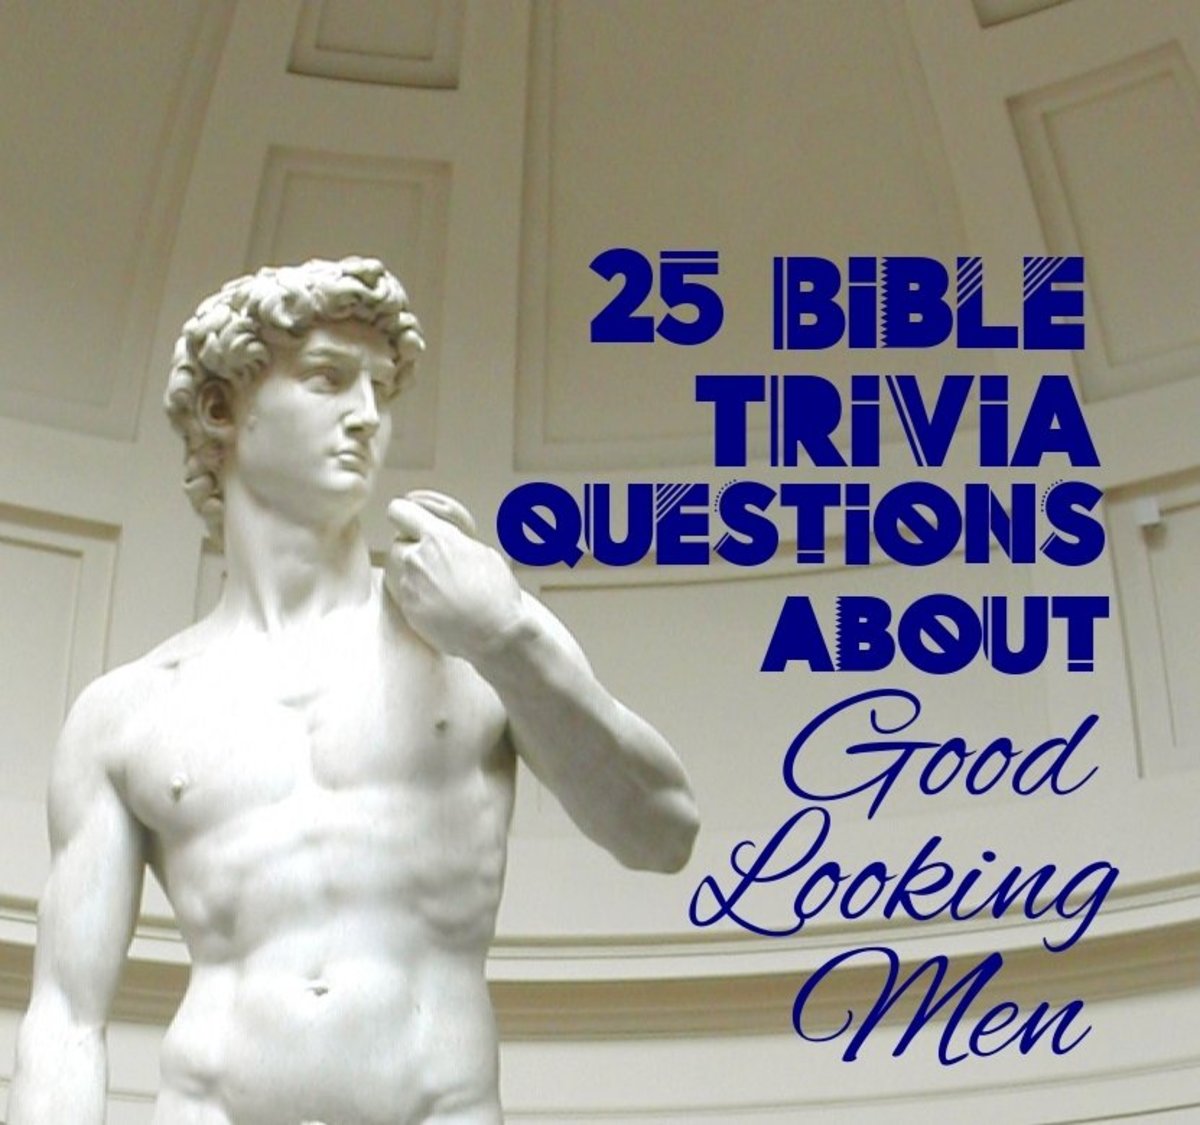 Look no further for fun and flirty Bible trivia!